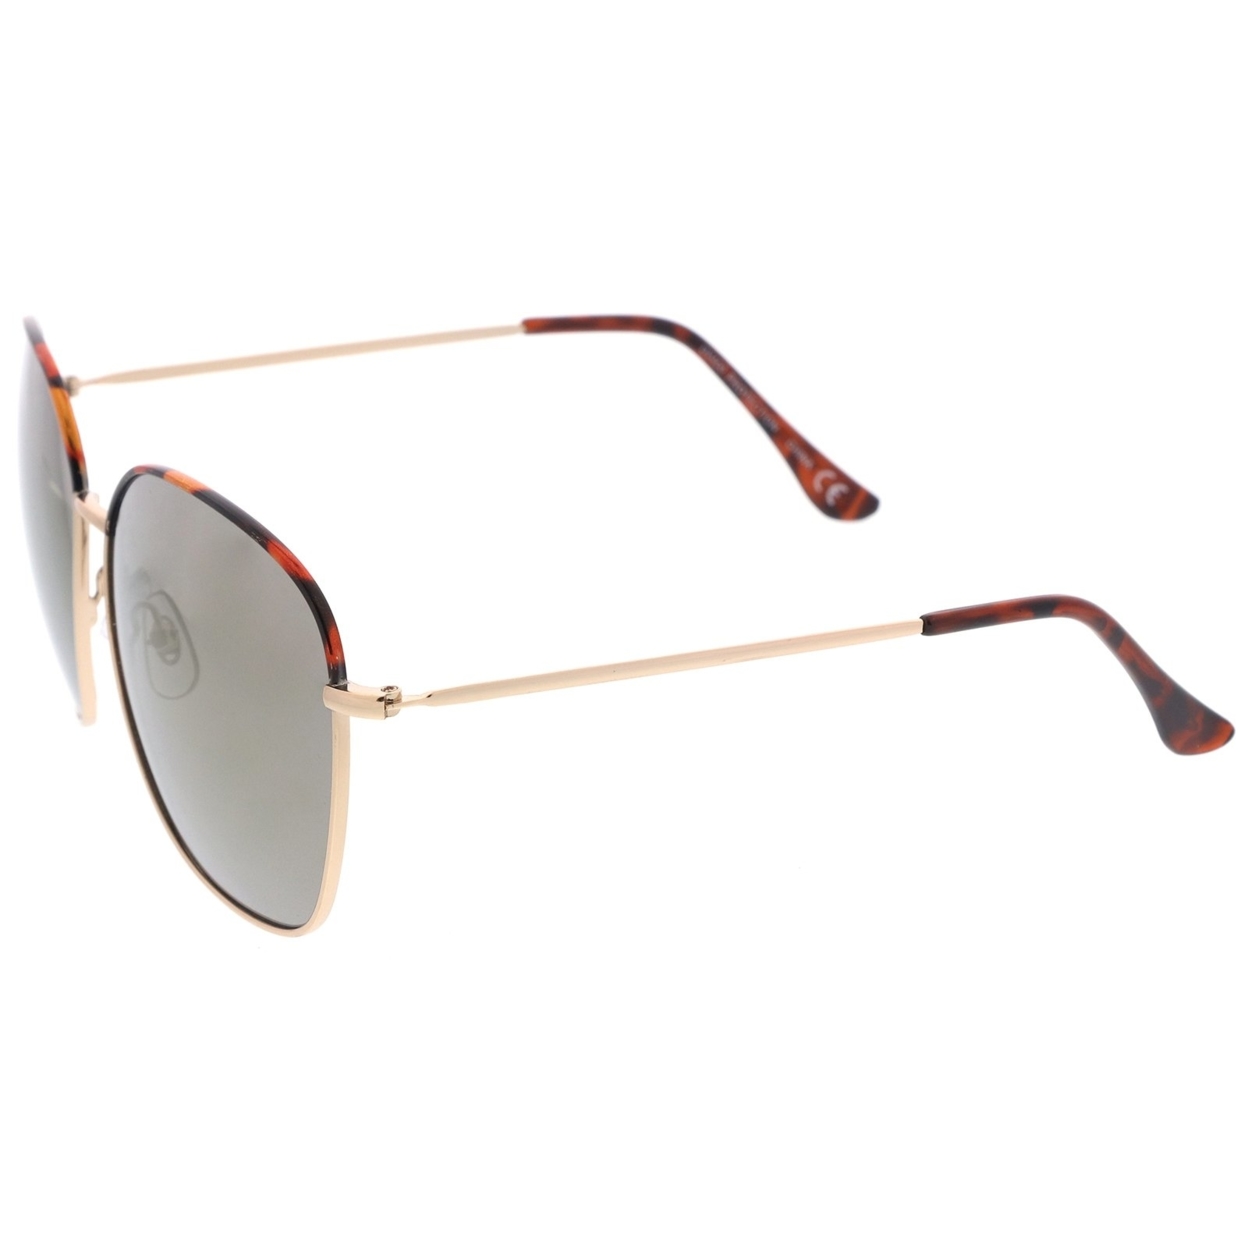 Mod Oversize Two-Toned Metal Frame Slim Temples Square Sunglasses 61mm - Tortoise-Gold / Smoke Gradient